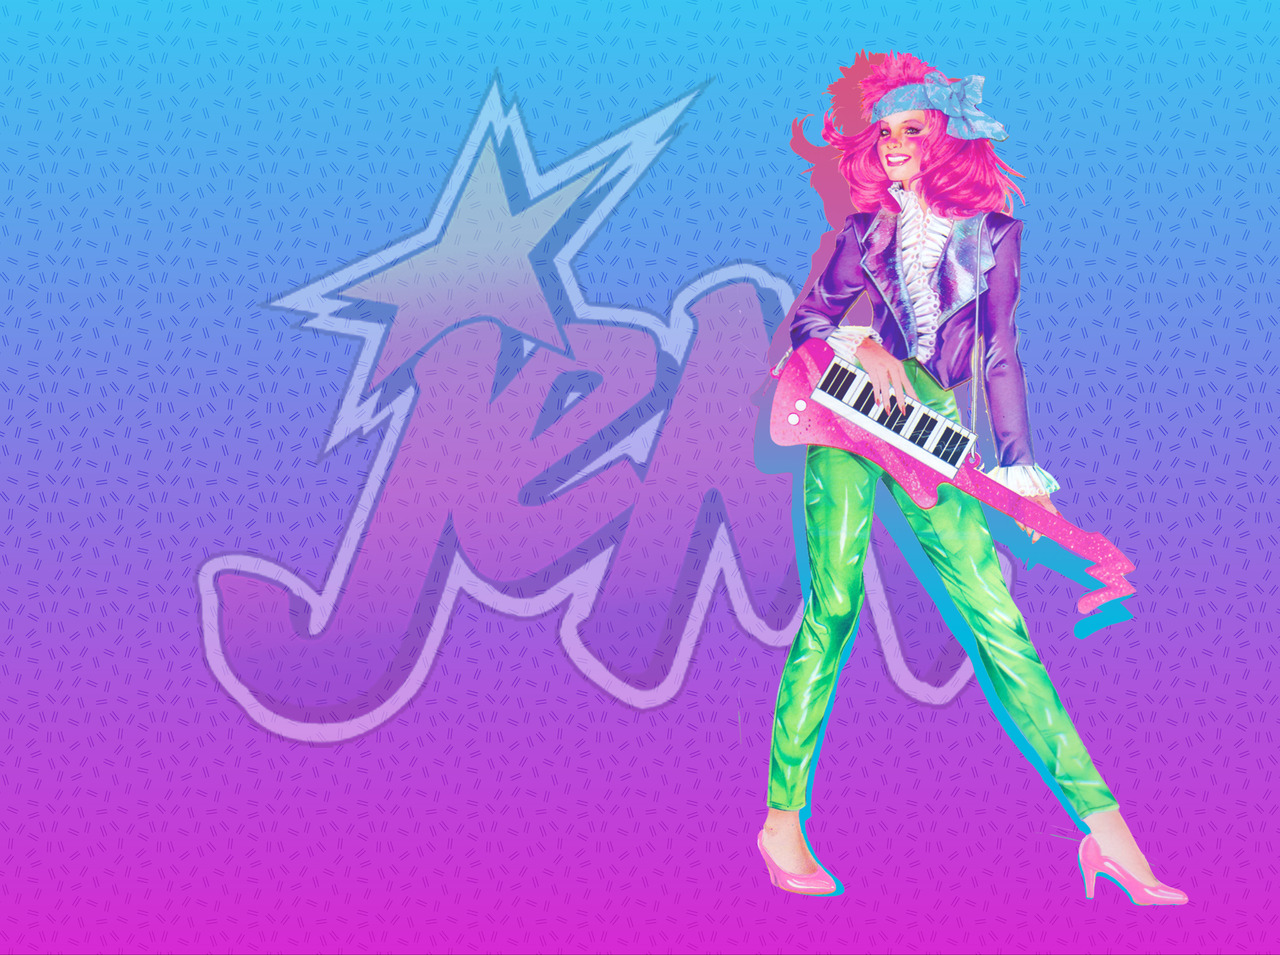 tights repin like comment jem and the holograms spaghettiwithmeatballs